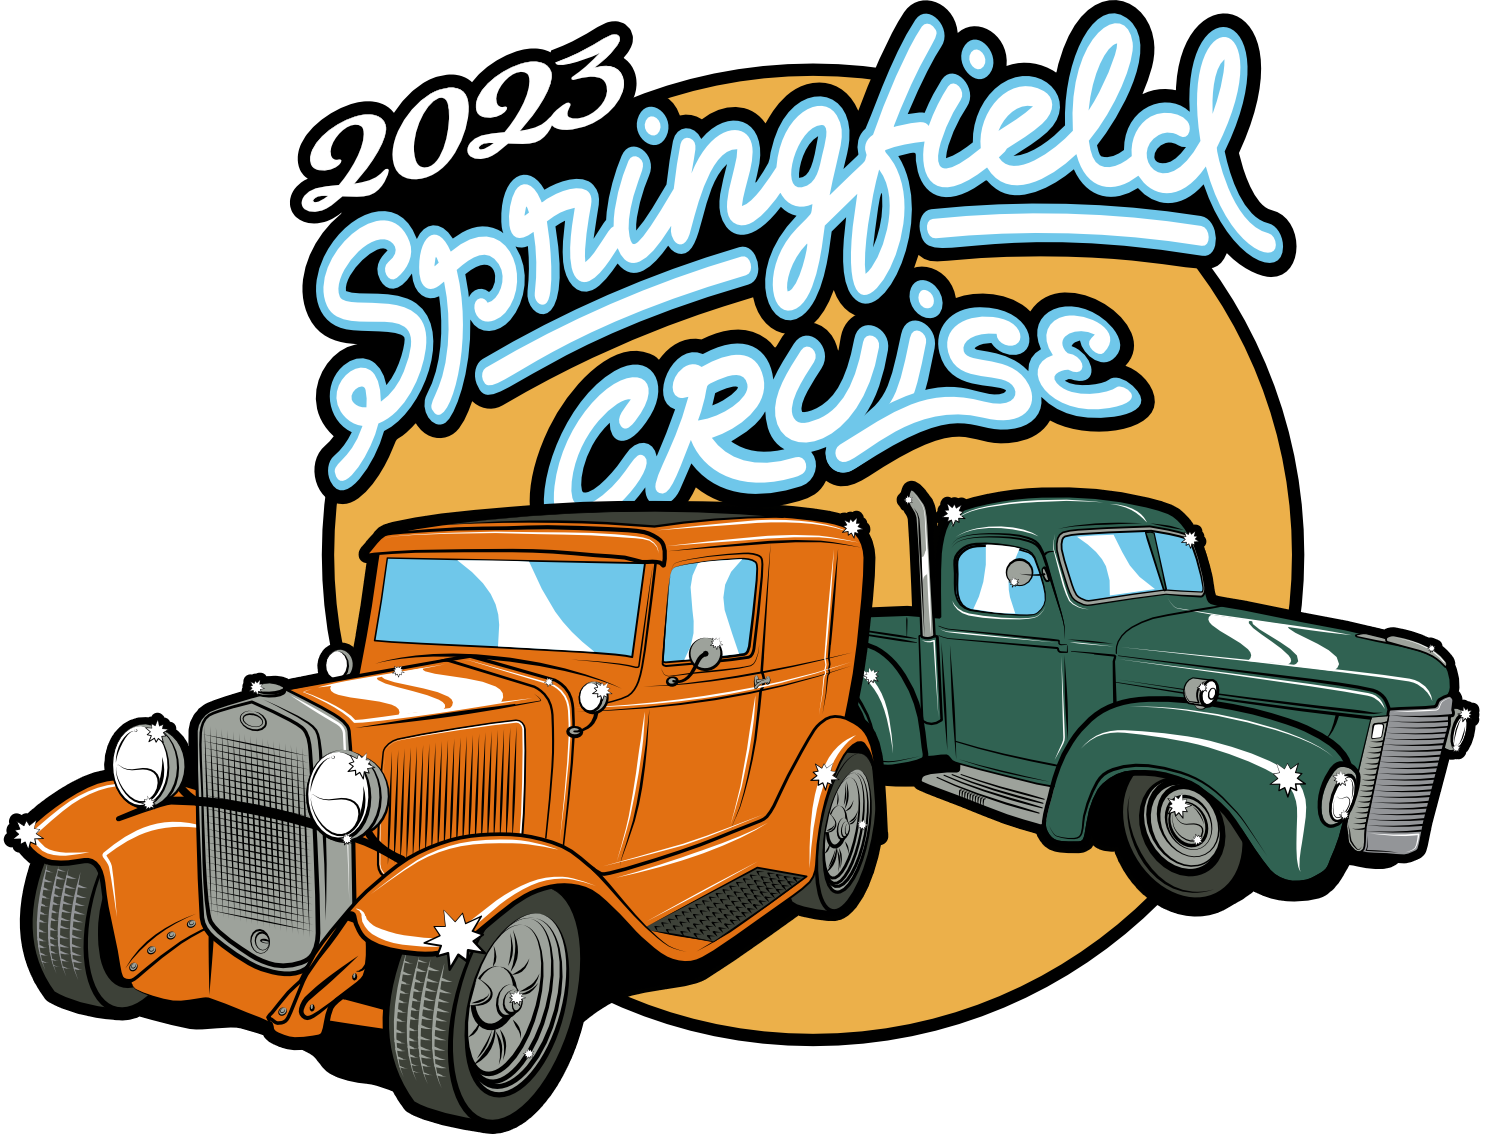 //springfieldcruise.com/wp-content/uploads/2022/09/springfield-cruise-2023-front-graphic-web.png